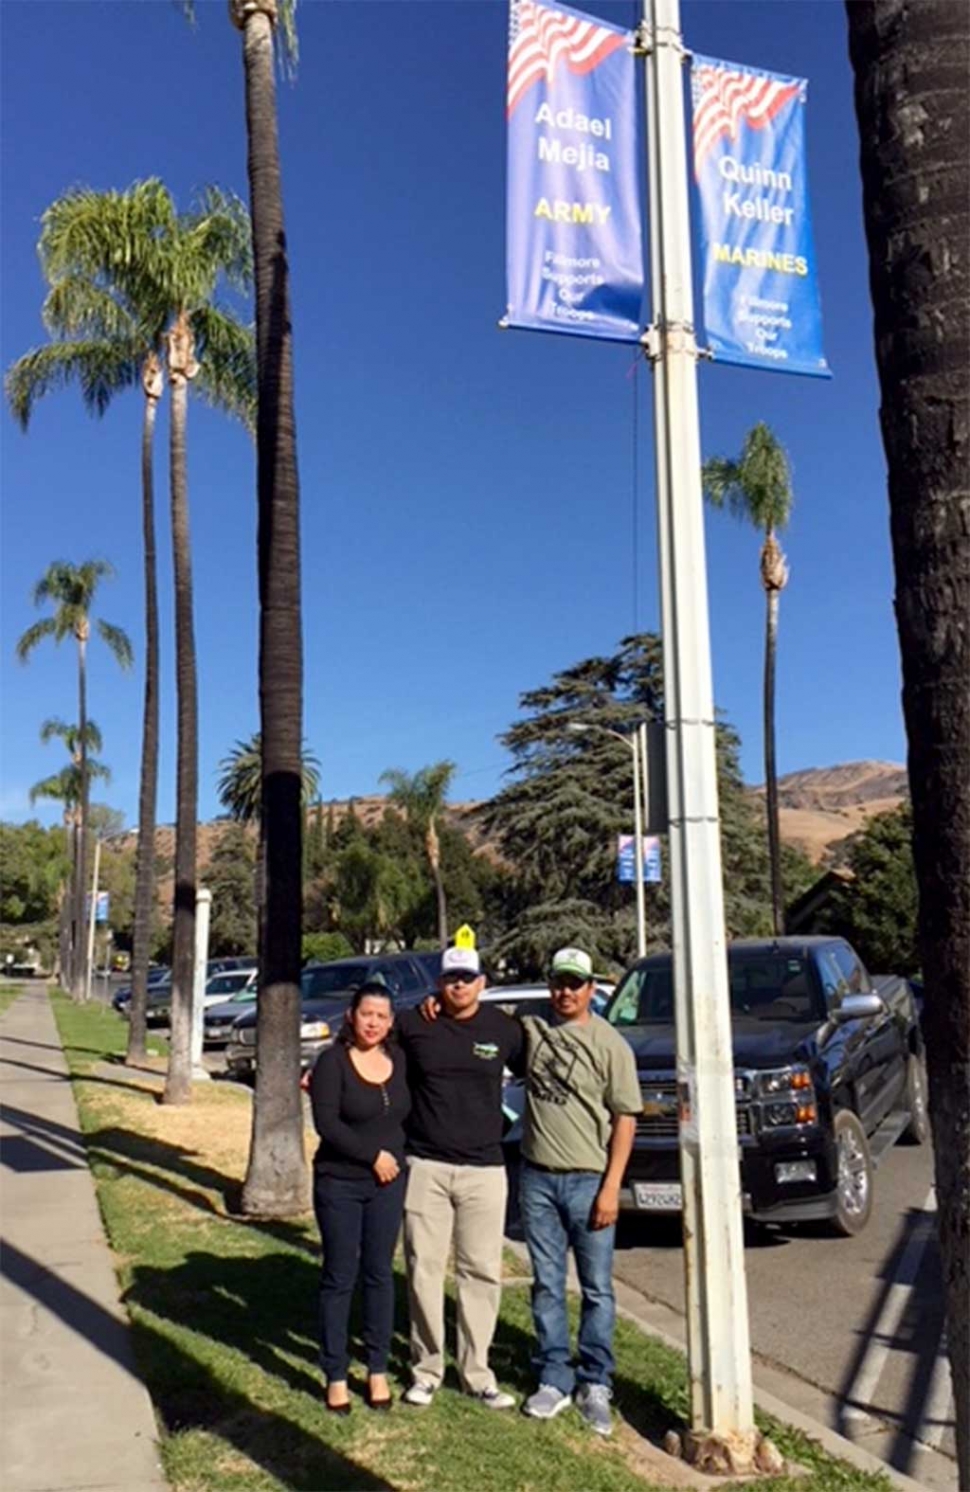 A New Military Banner was installed for Adael Mejia (center) representing the US Army along with his parents Adrian Mejia Hernandez and Laura Mejia. Photos courtesy Virginia De La Piedra.